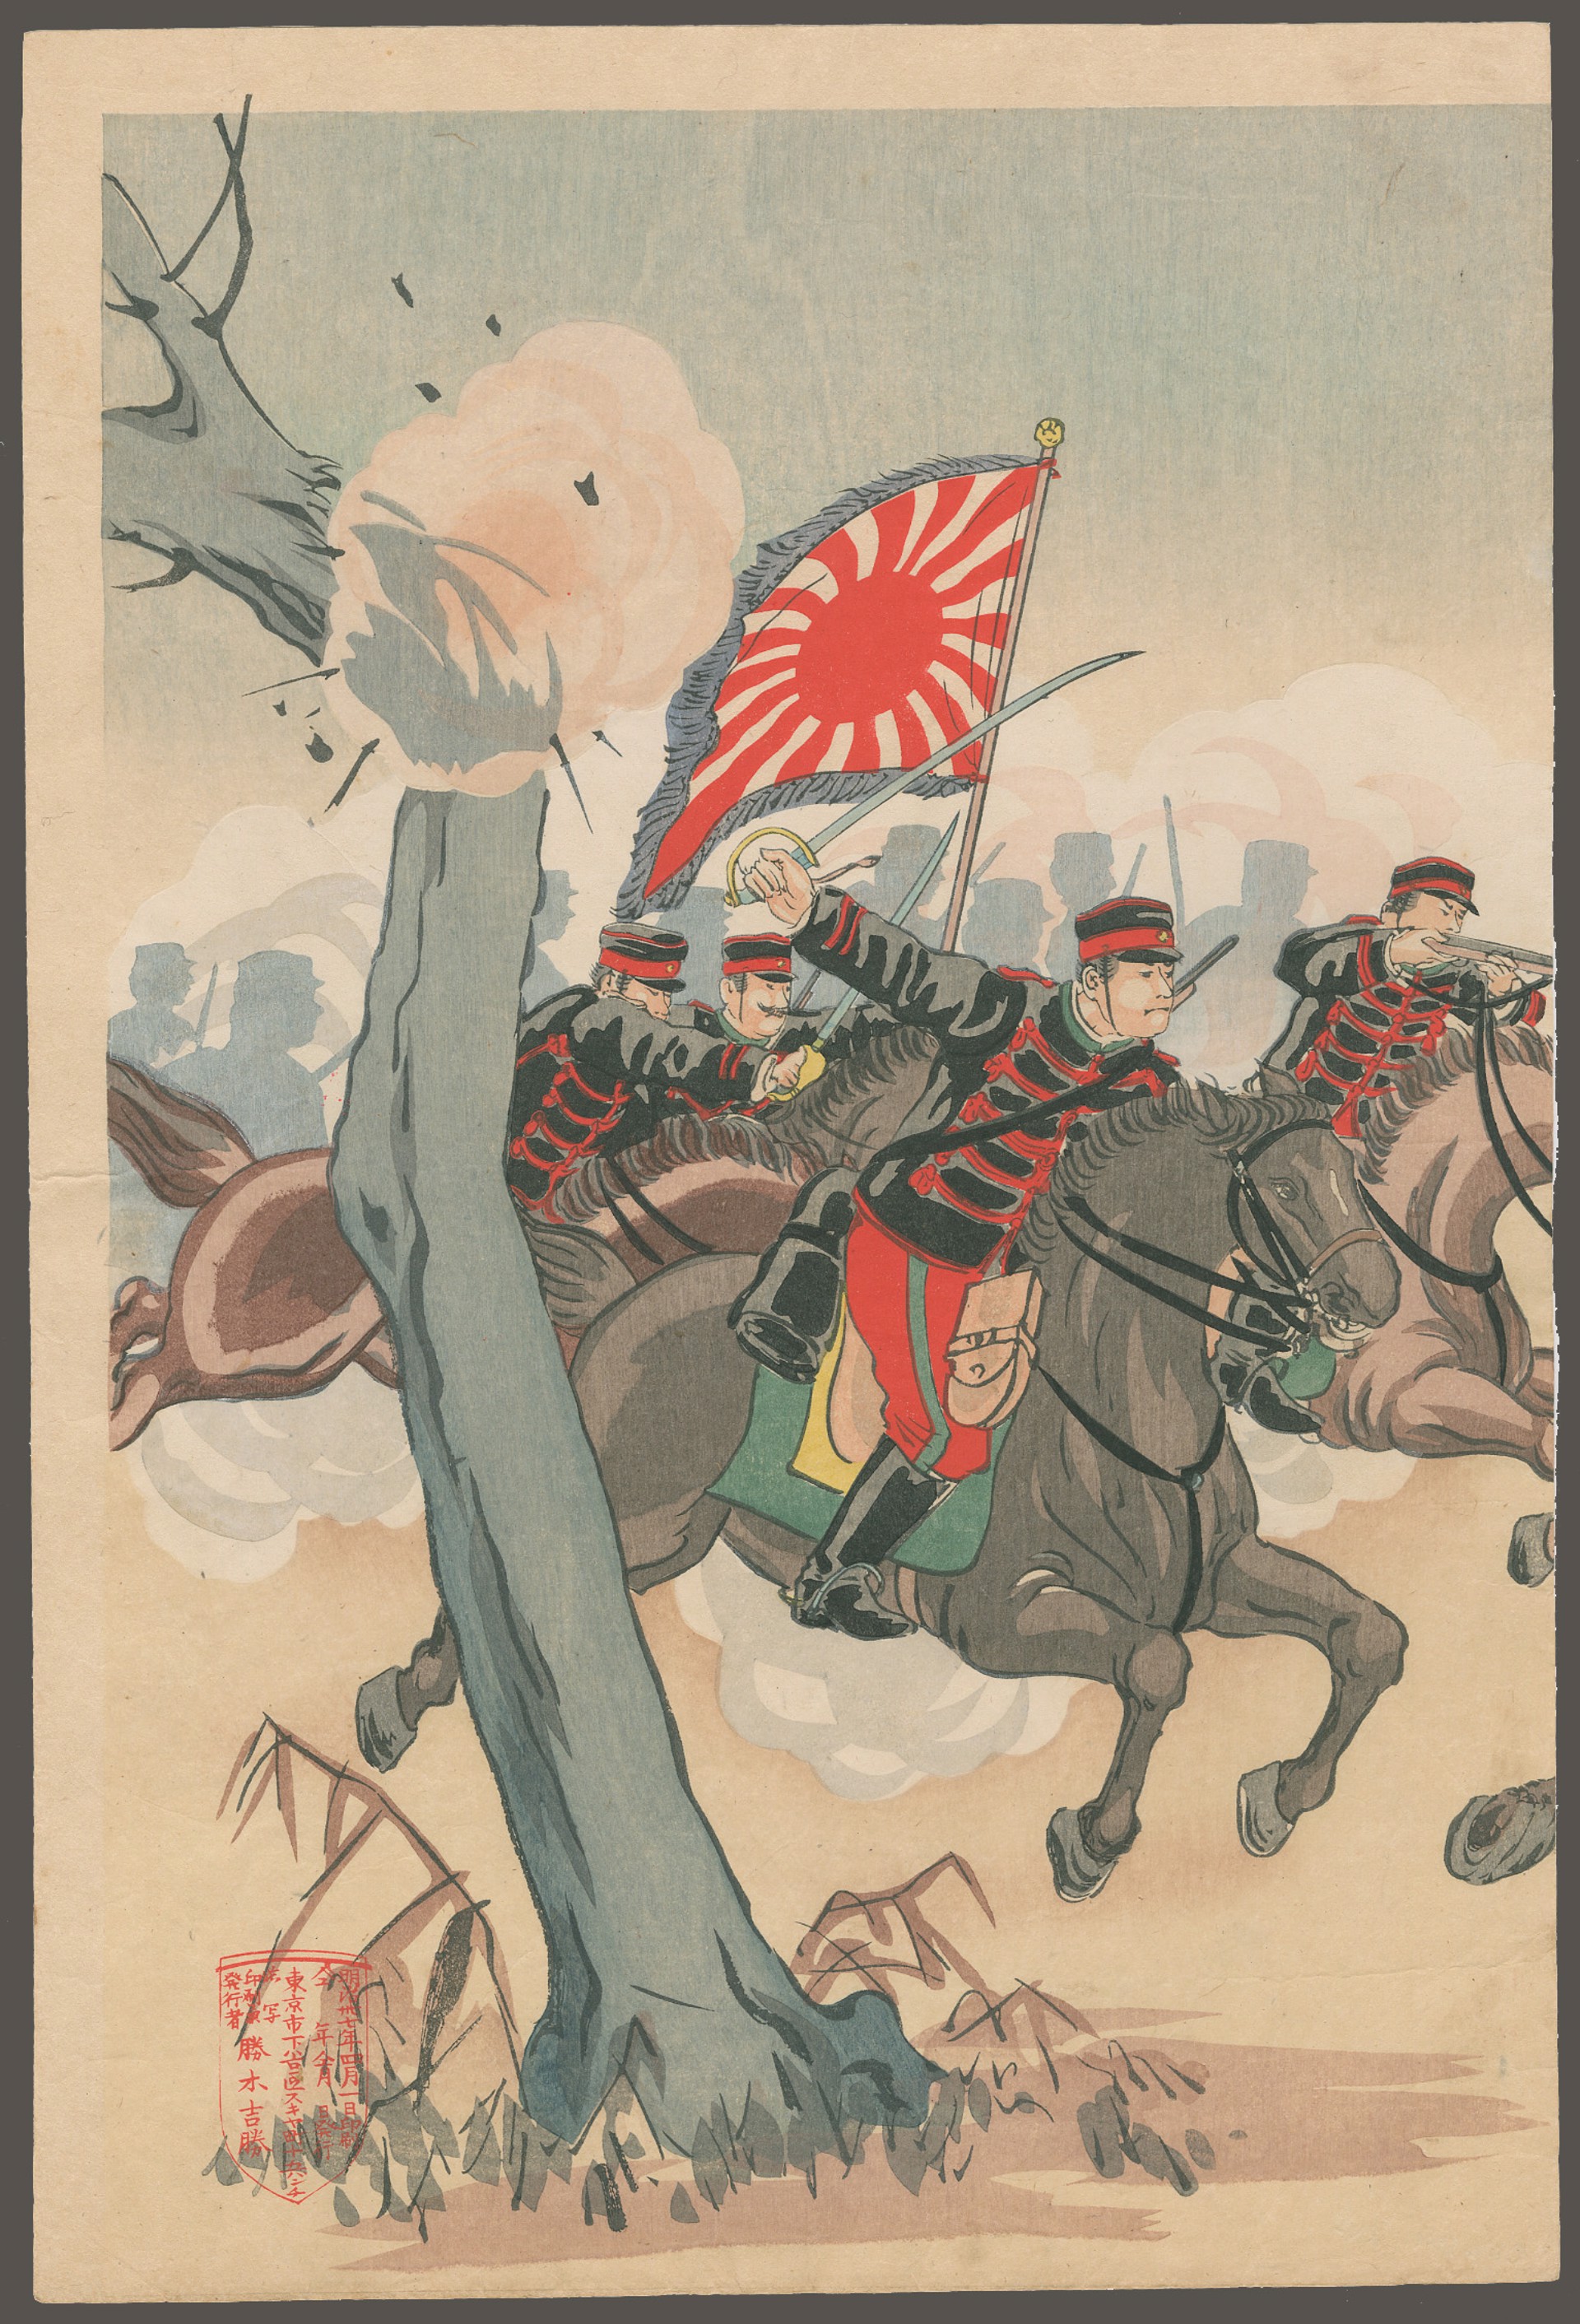 First Engagement of Japanese and Russian Land Forces at Dingzhou Russo - Japanese War by Jikkyo